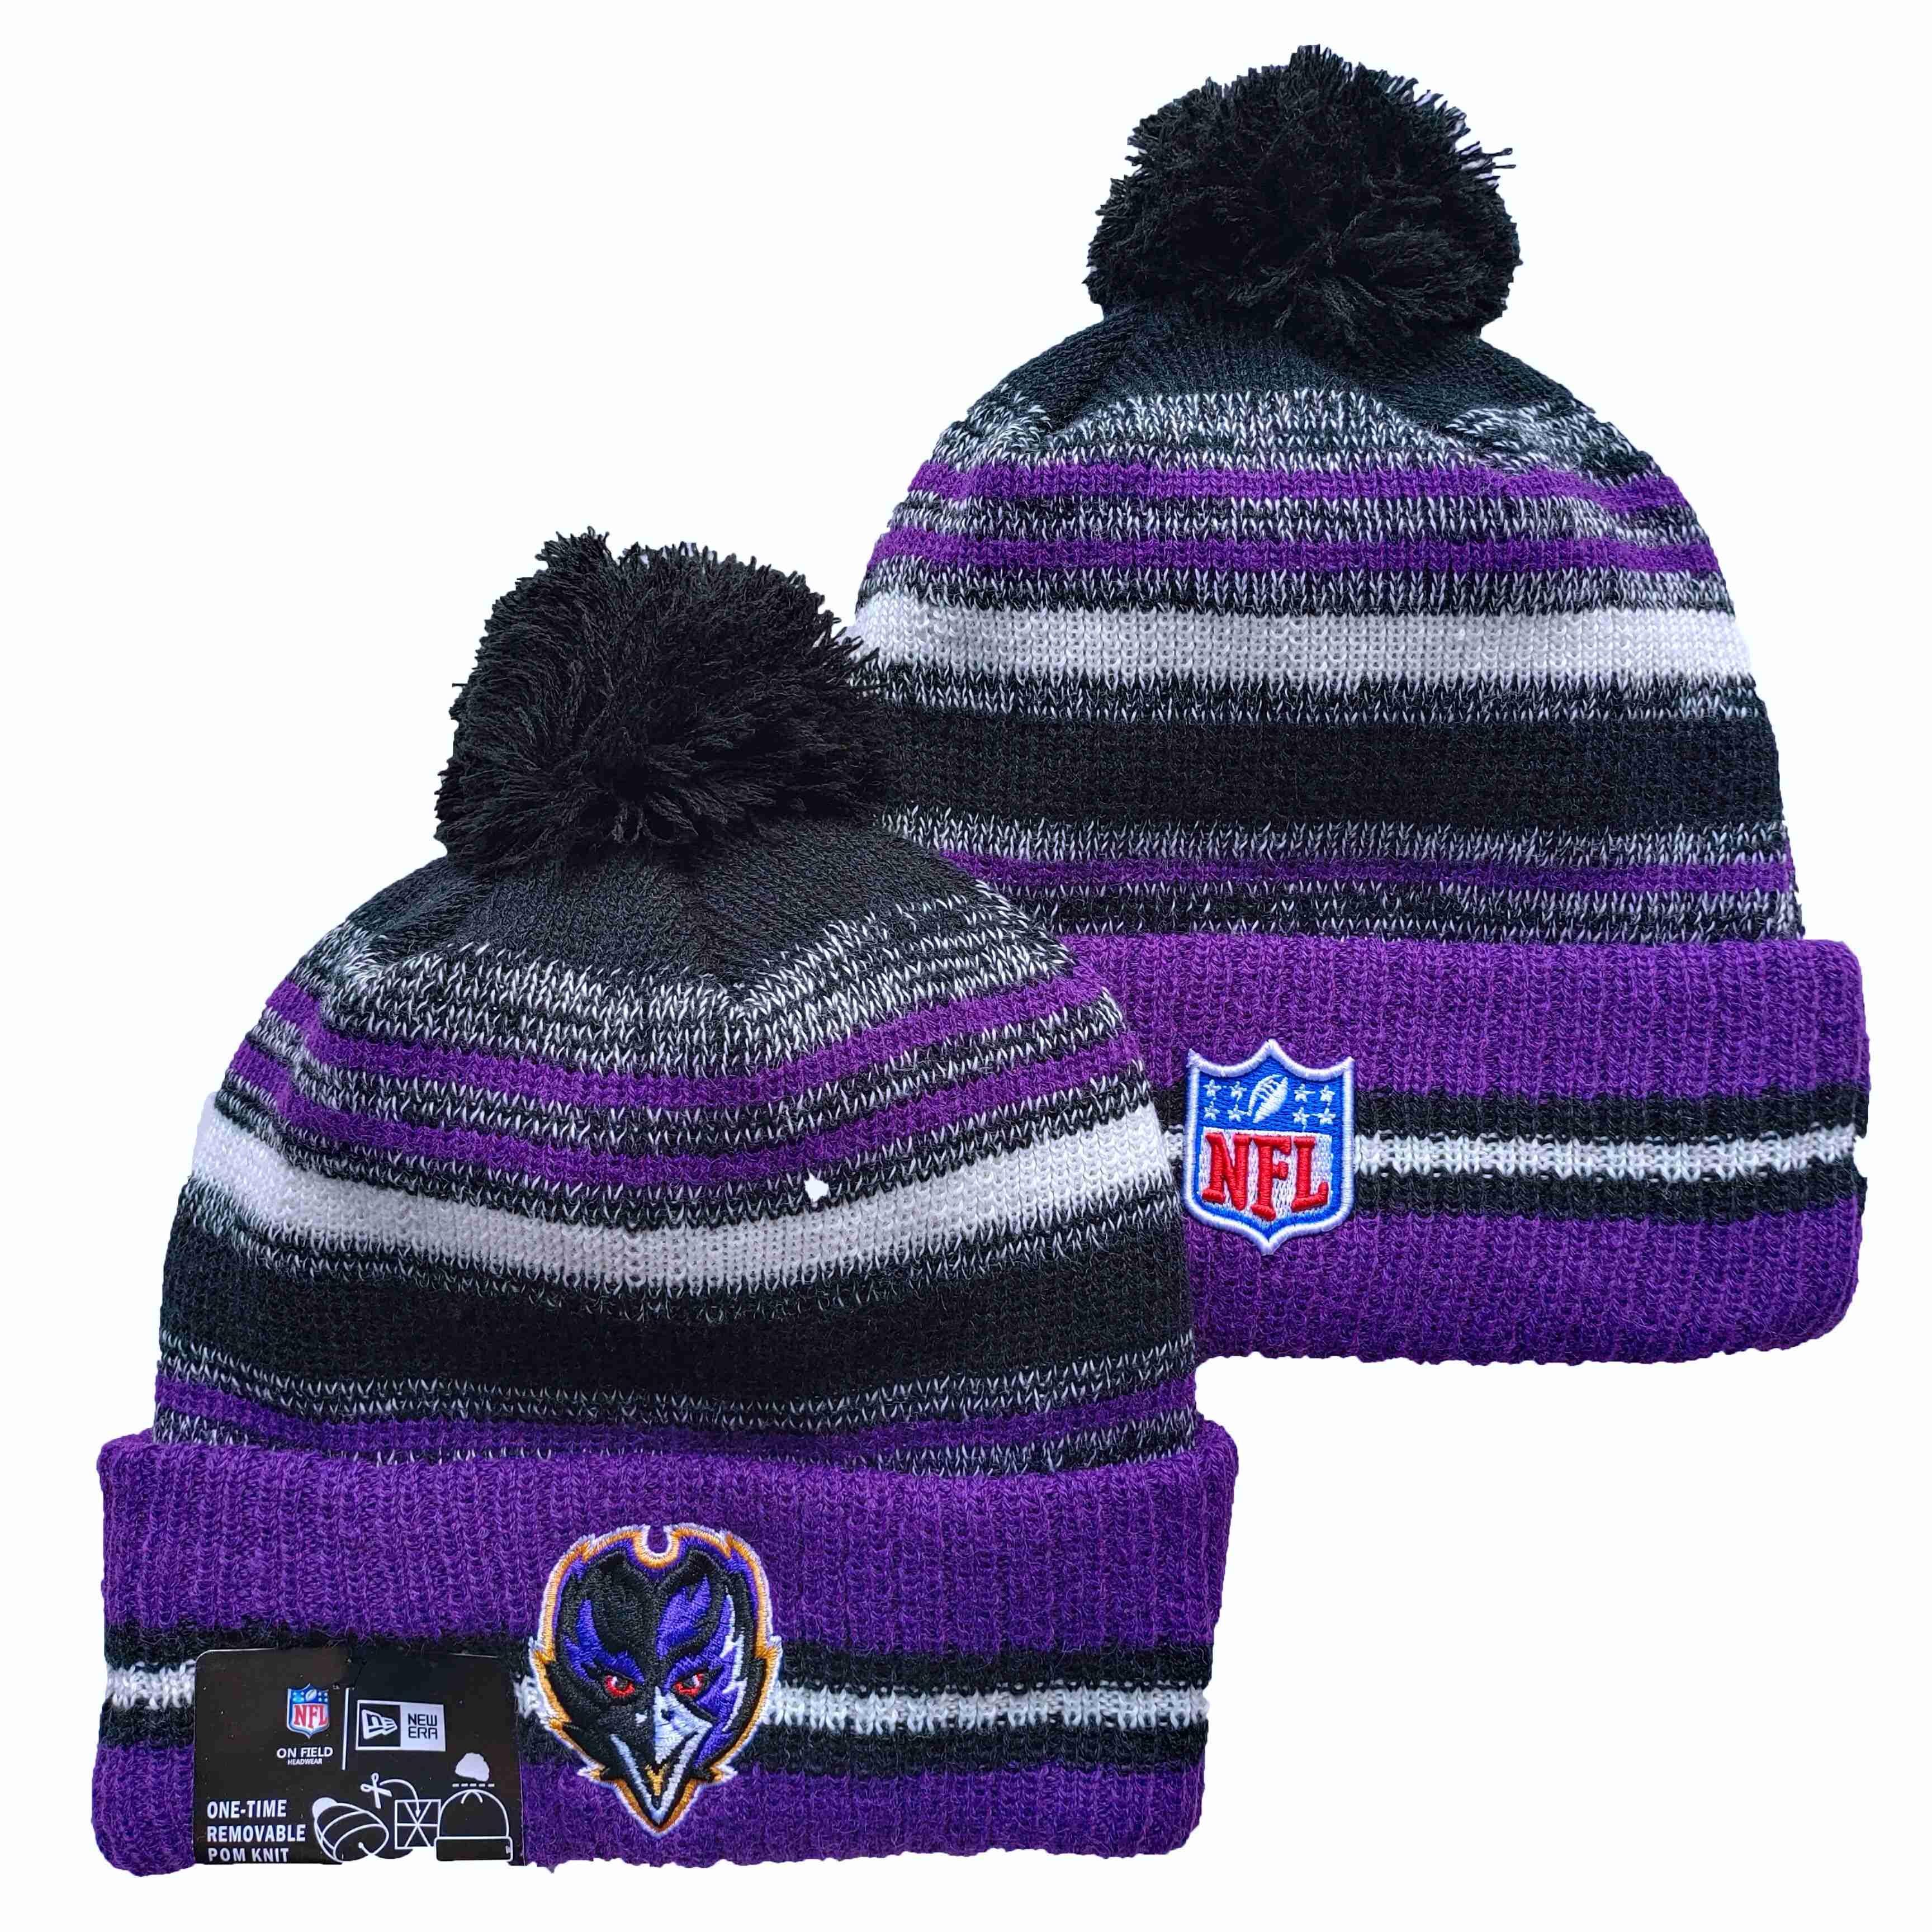 NFL Baltimore Ravens Beanies Knit Hats-YD1196